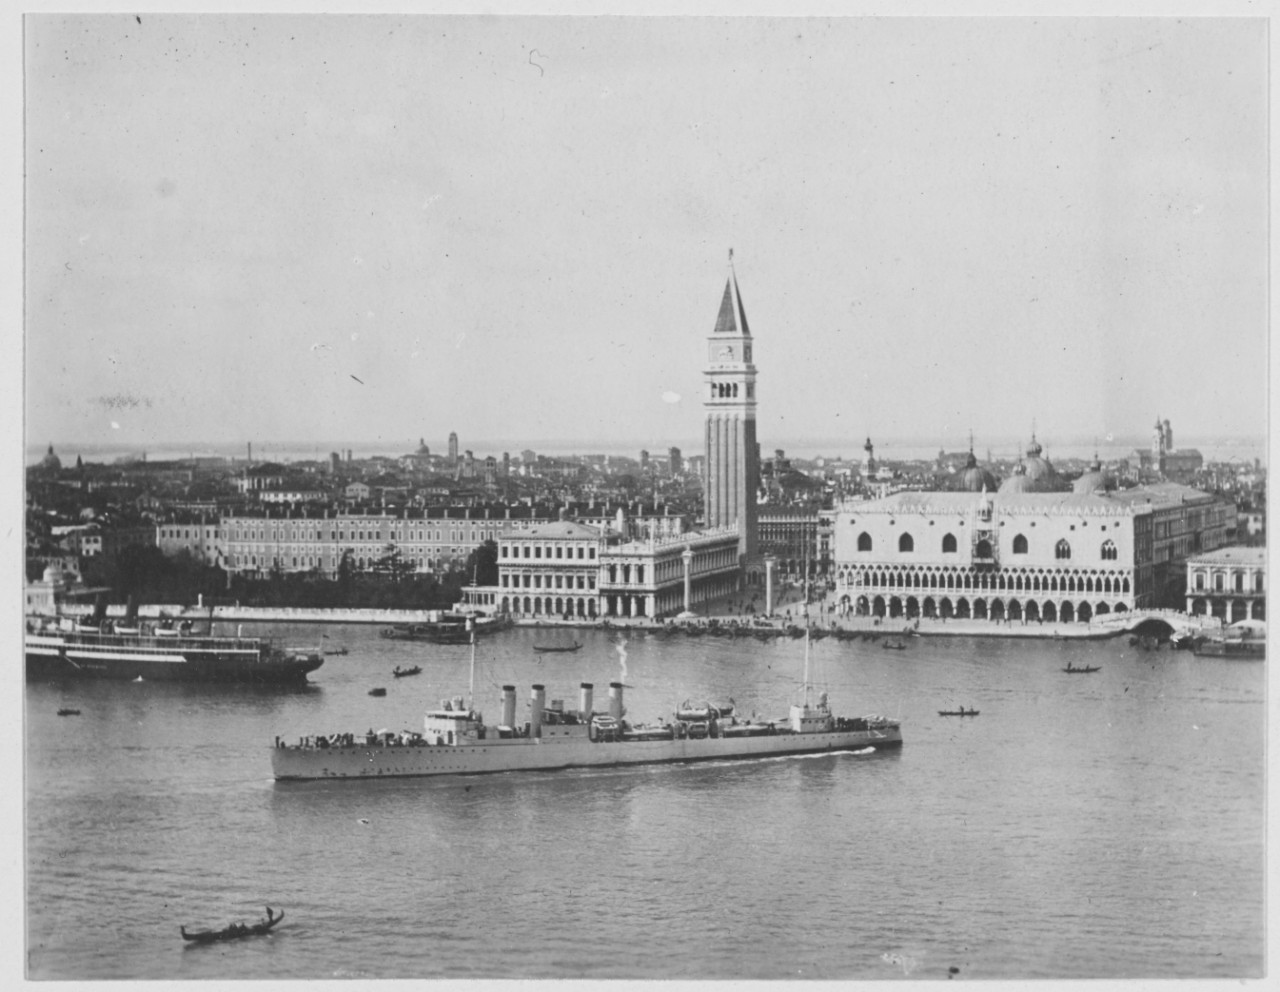 U.S. Destroyer in a Canal at Venice, Italy